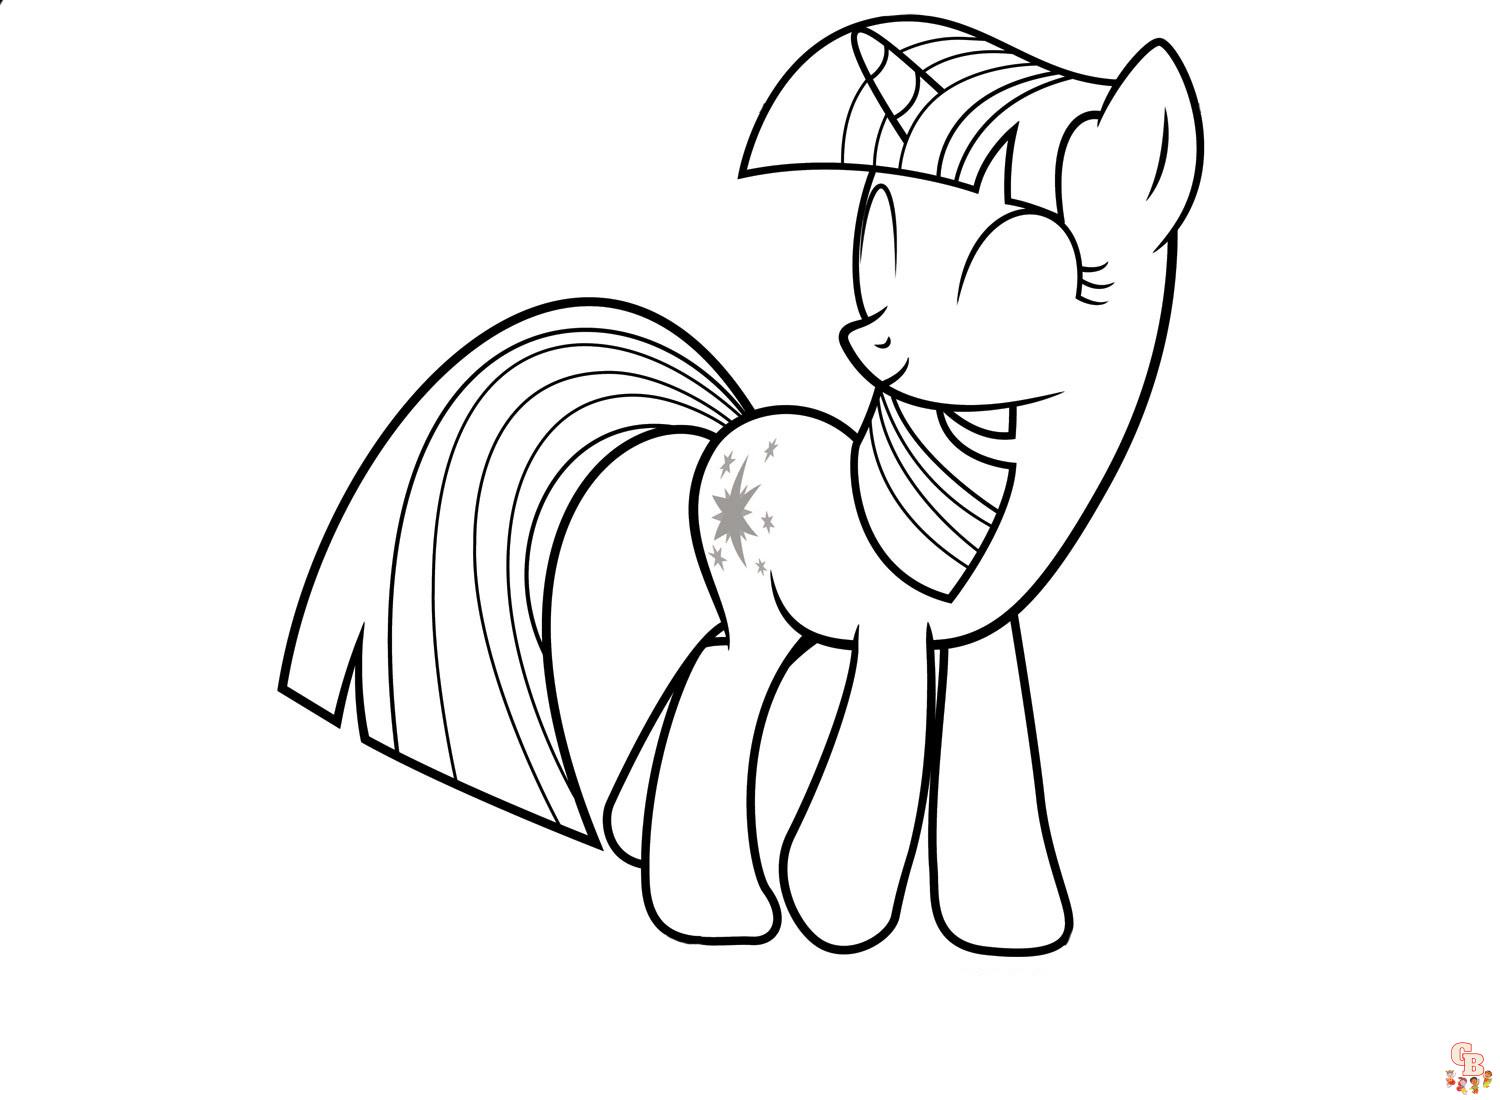 Cute Twilight Sparkle Coloring Pages: Free Printable and Easy